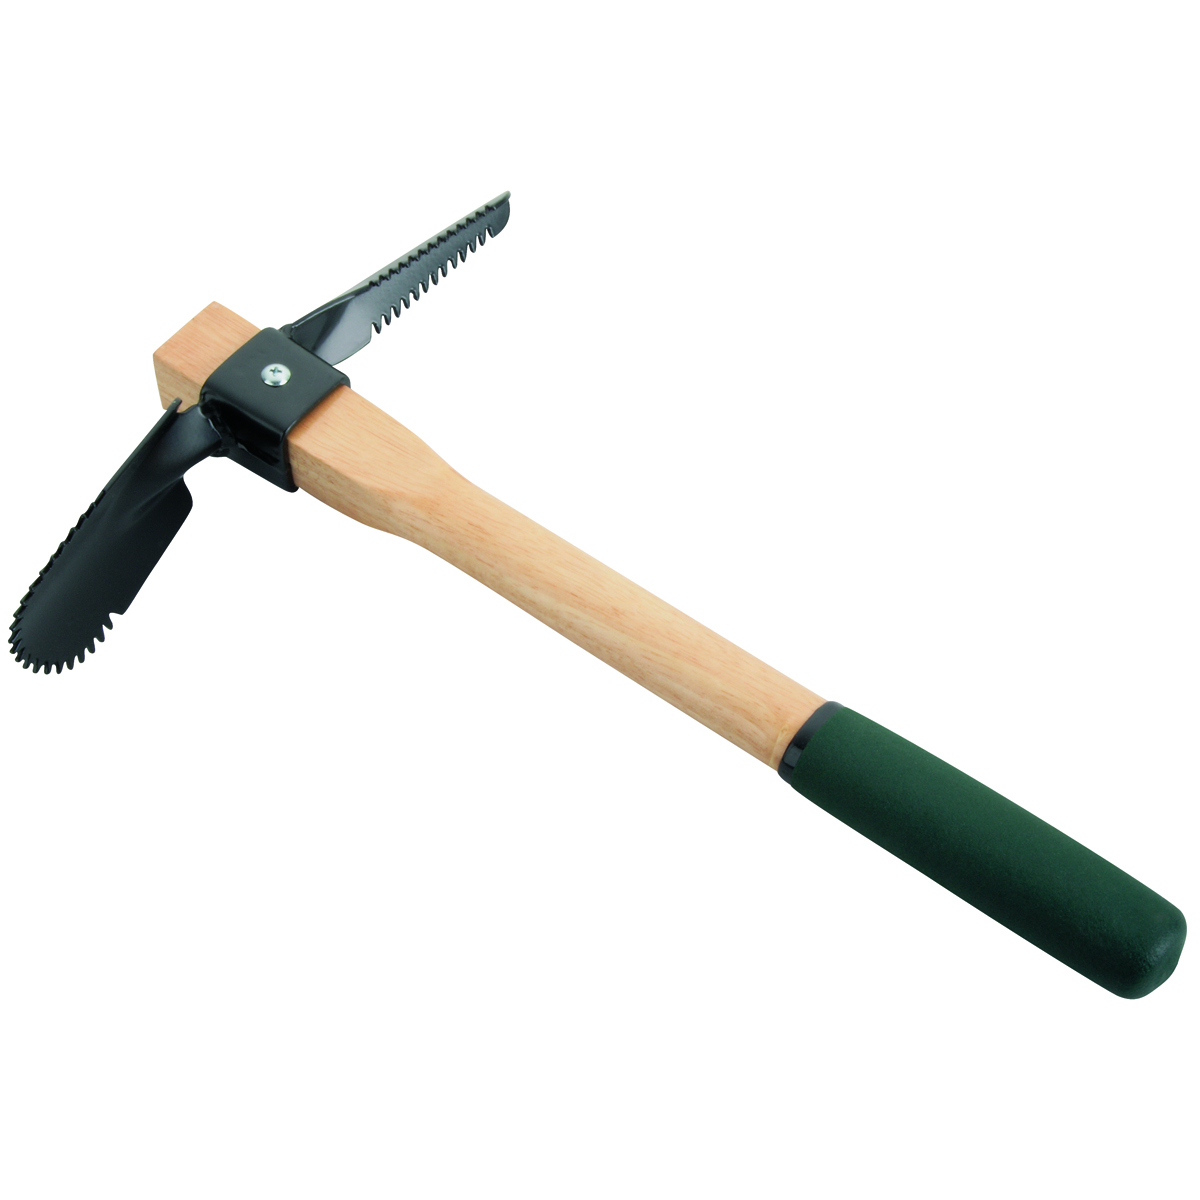 Landscapers Select GM7002 Hoe and Pick Tool, Ergonomic Cushion Grip Handle